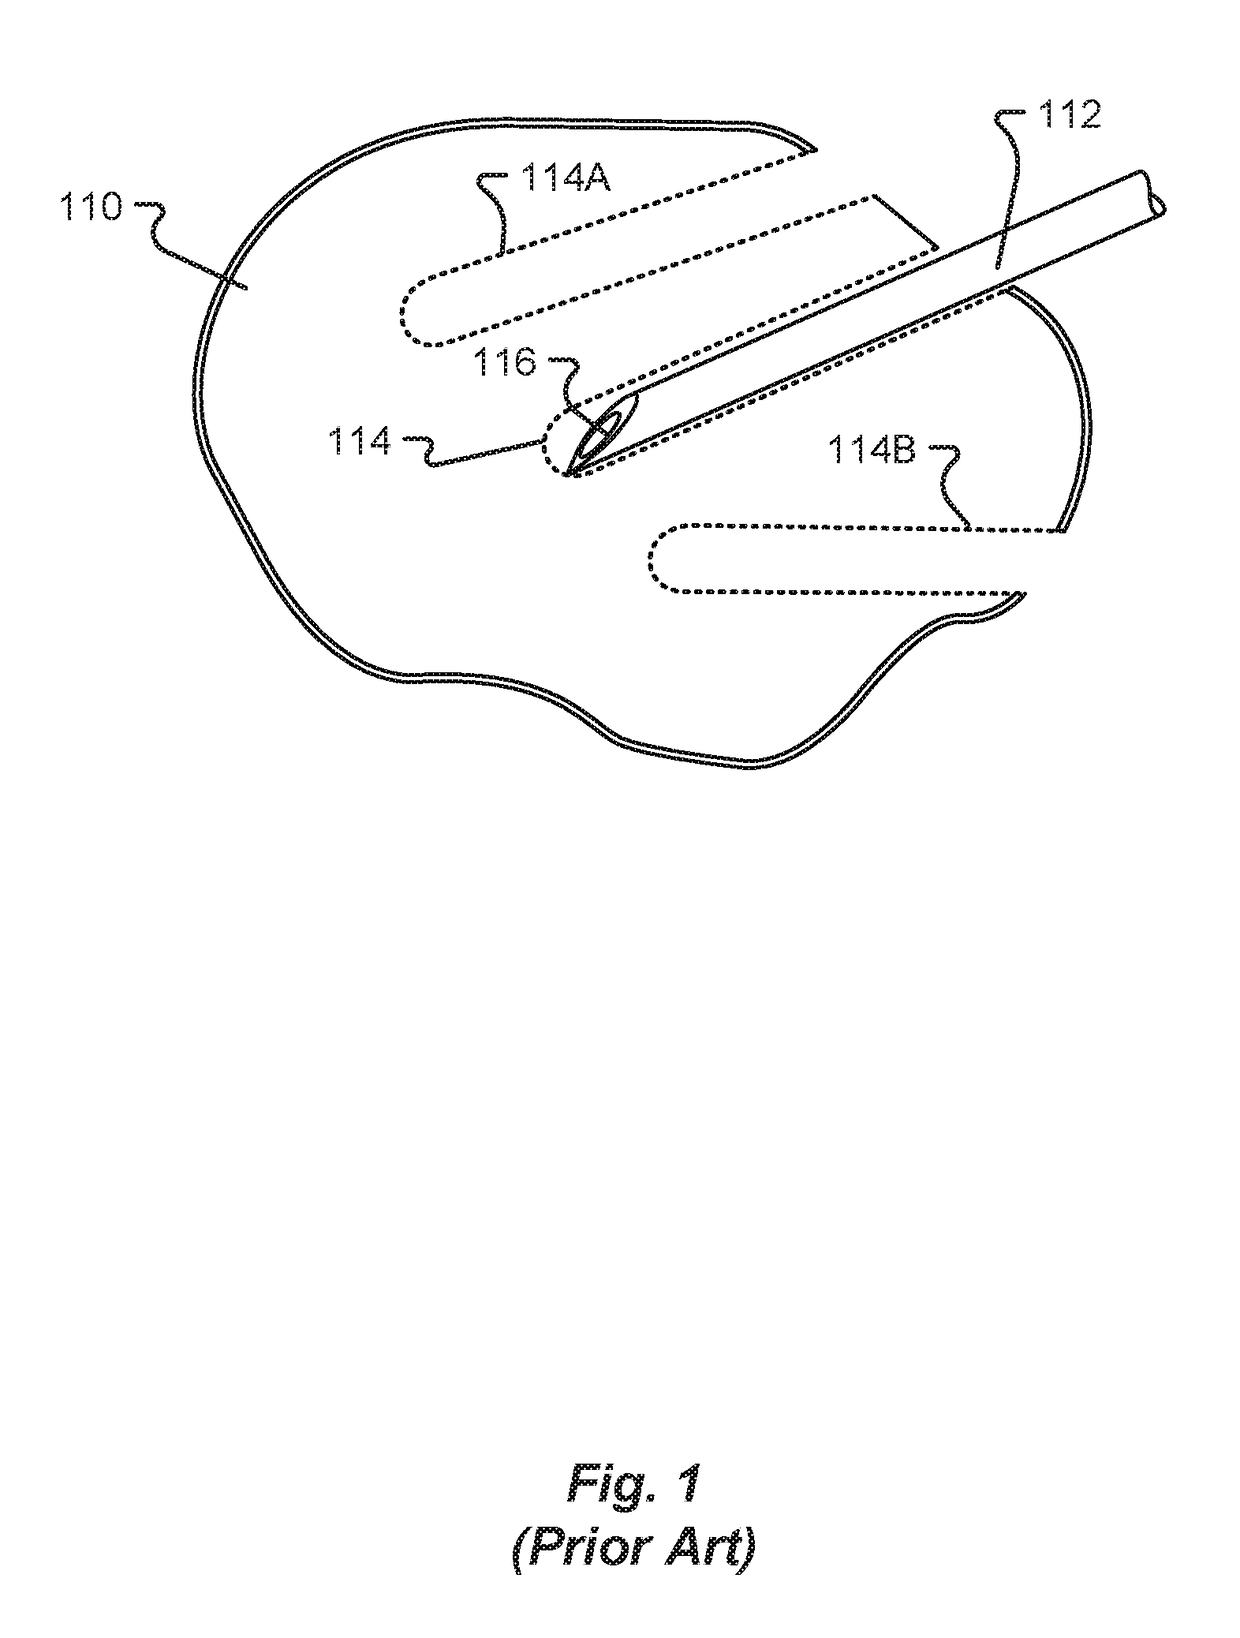 Stylet and Needle Combinations Used to Collect Tissue Samples During Endoscopic Procedures